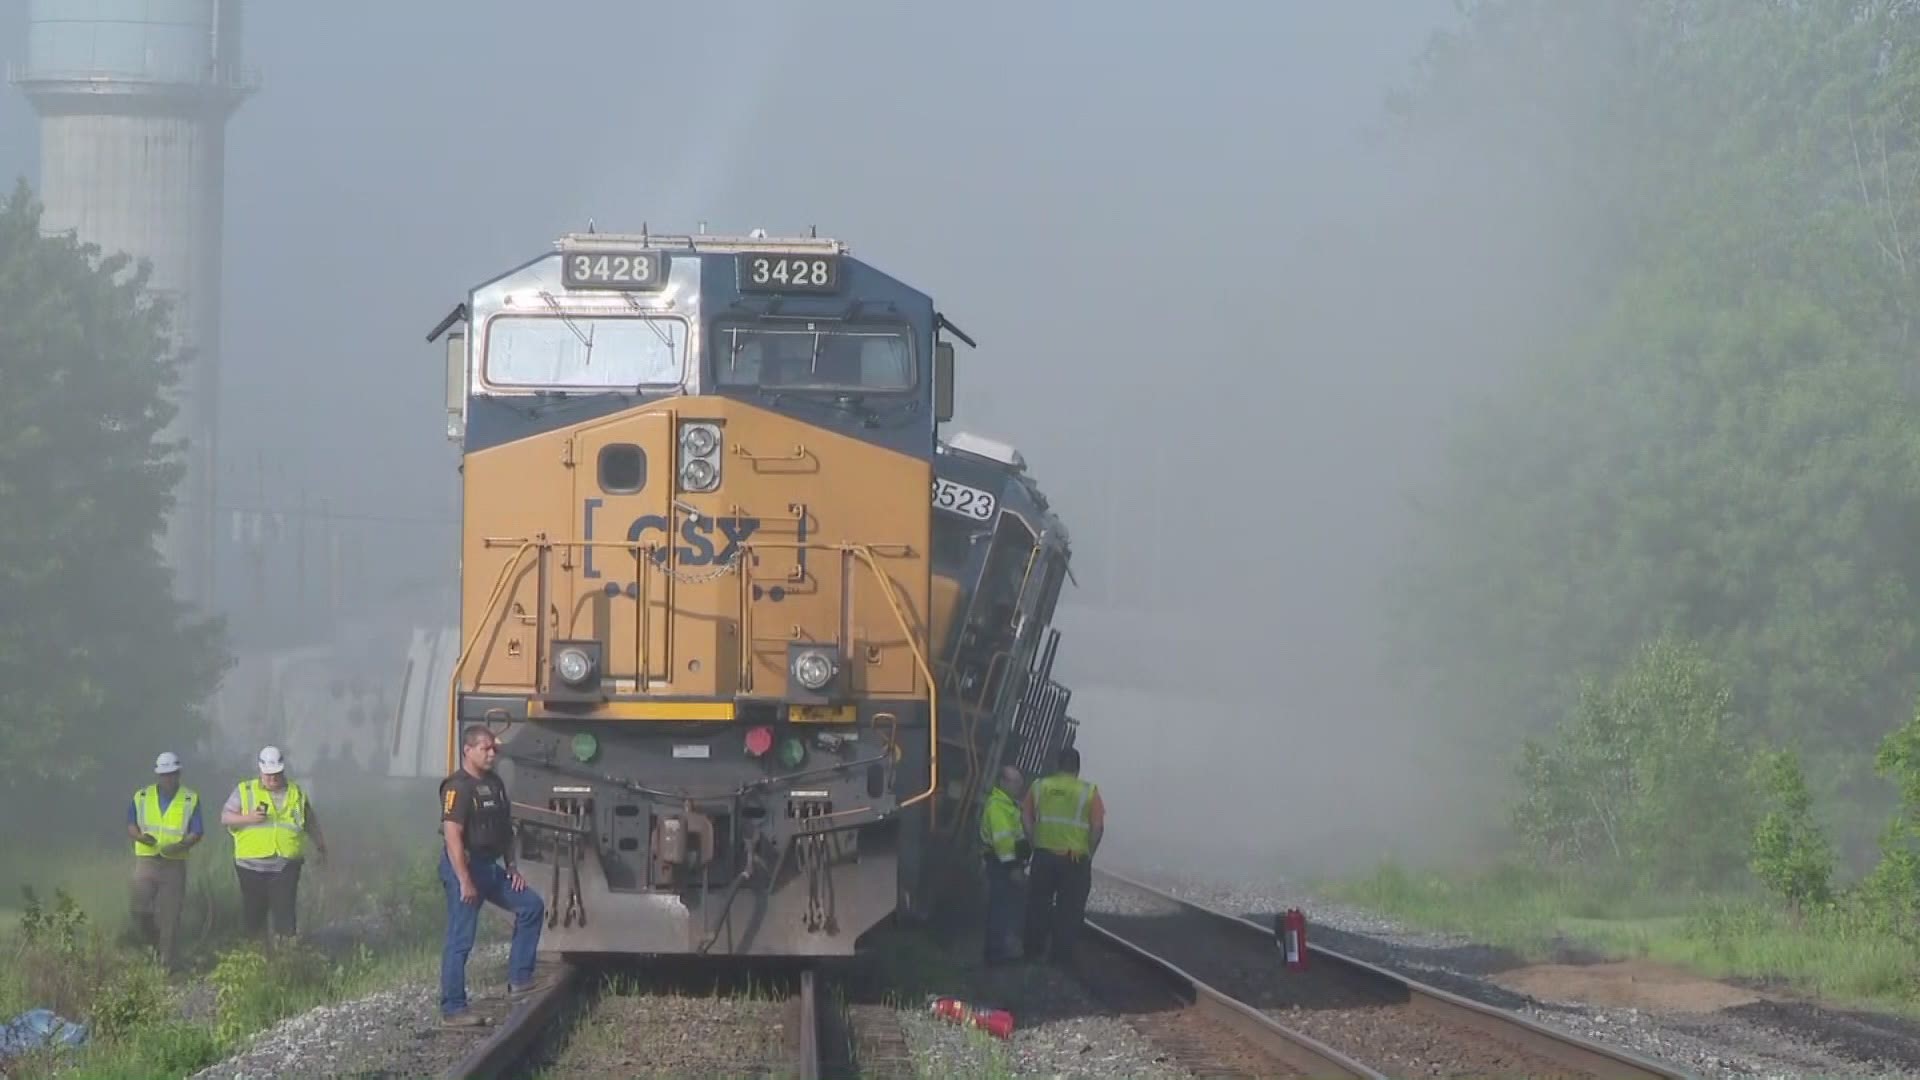 May 28, 2019: A CSX spokesperson says the trail derailment involved two locomotives and 22 railcars containing produce and building materials. Police say there was no threat to area residents and therefore no evacuation was needed.